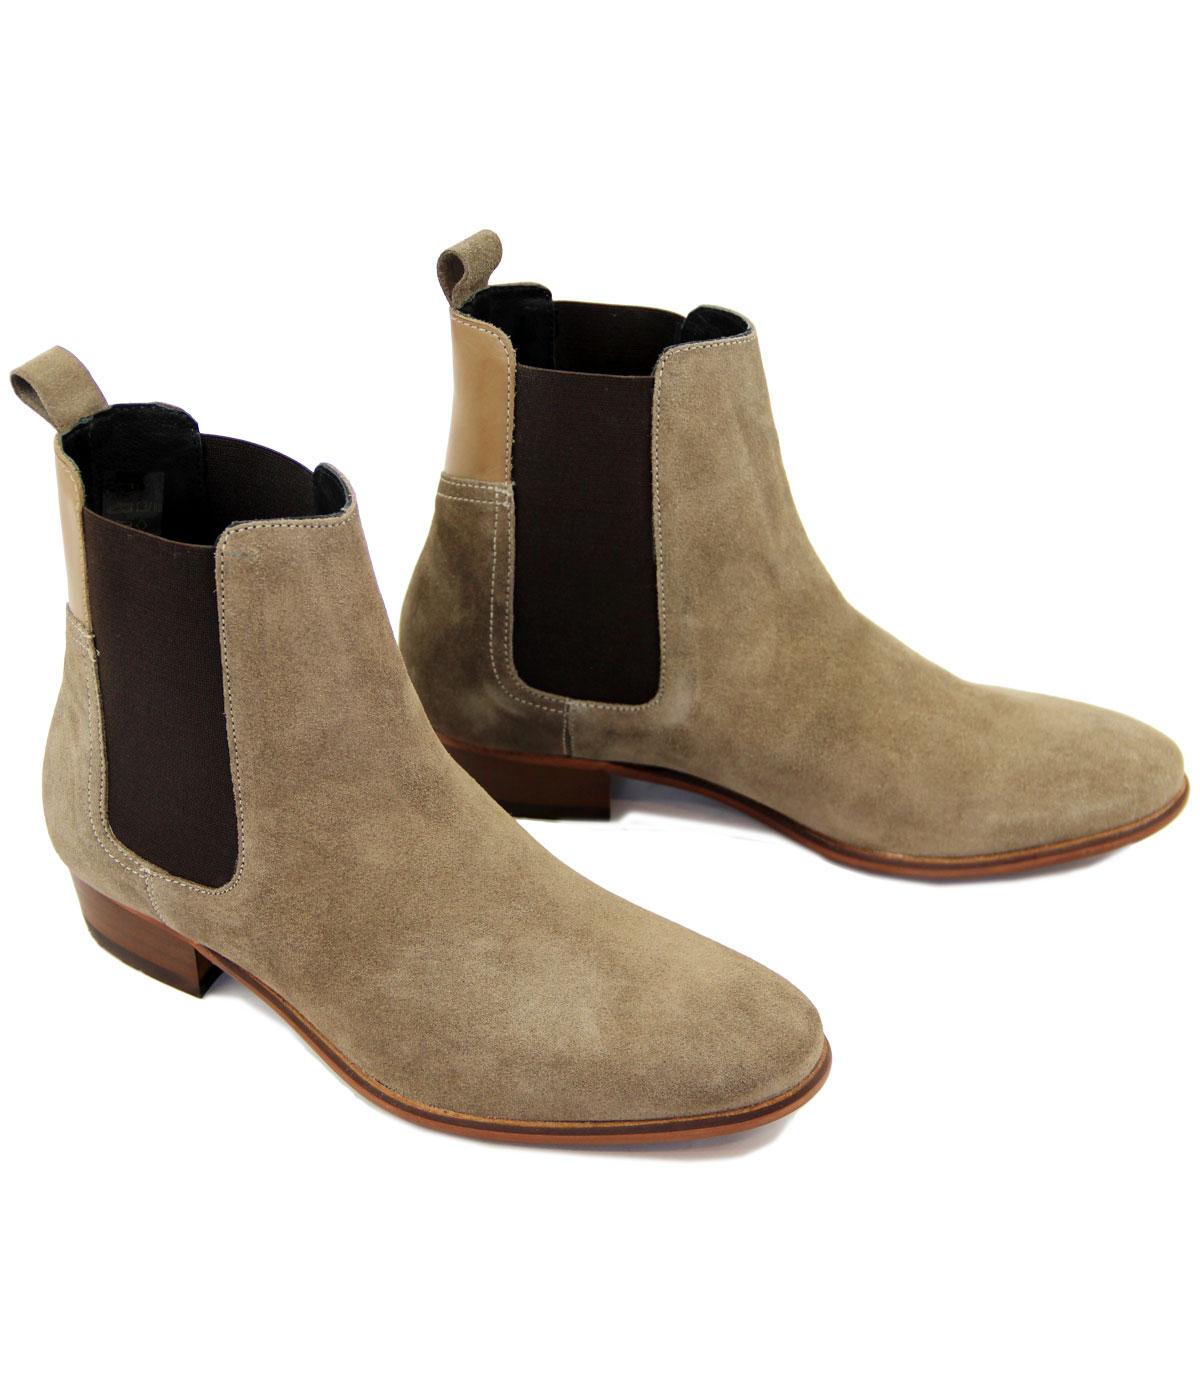 H By Hudson Watts Rtero Mod Cuban Heel Taupe Suede Chelsea Boots 6028